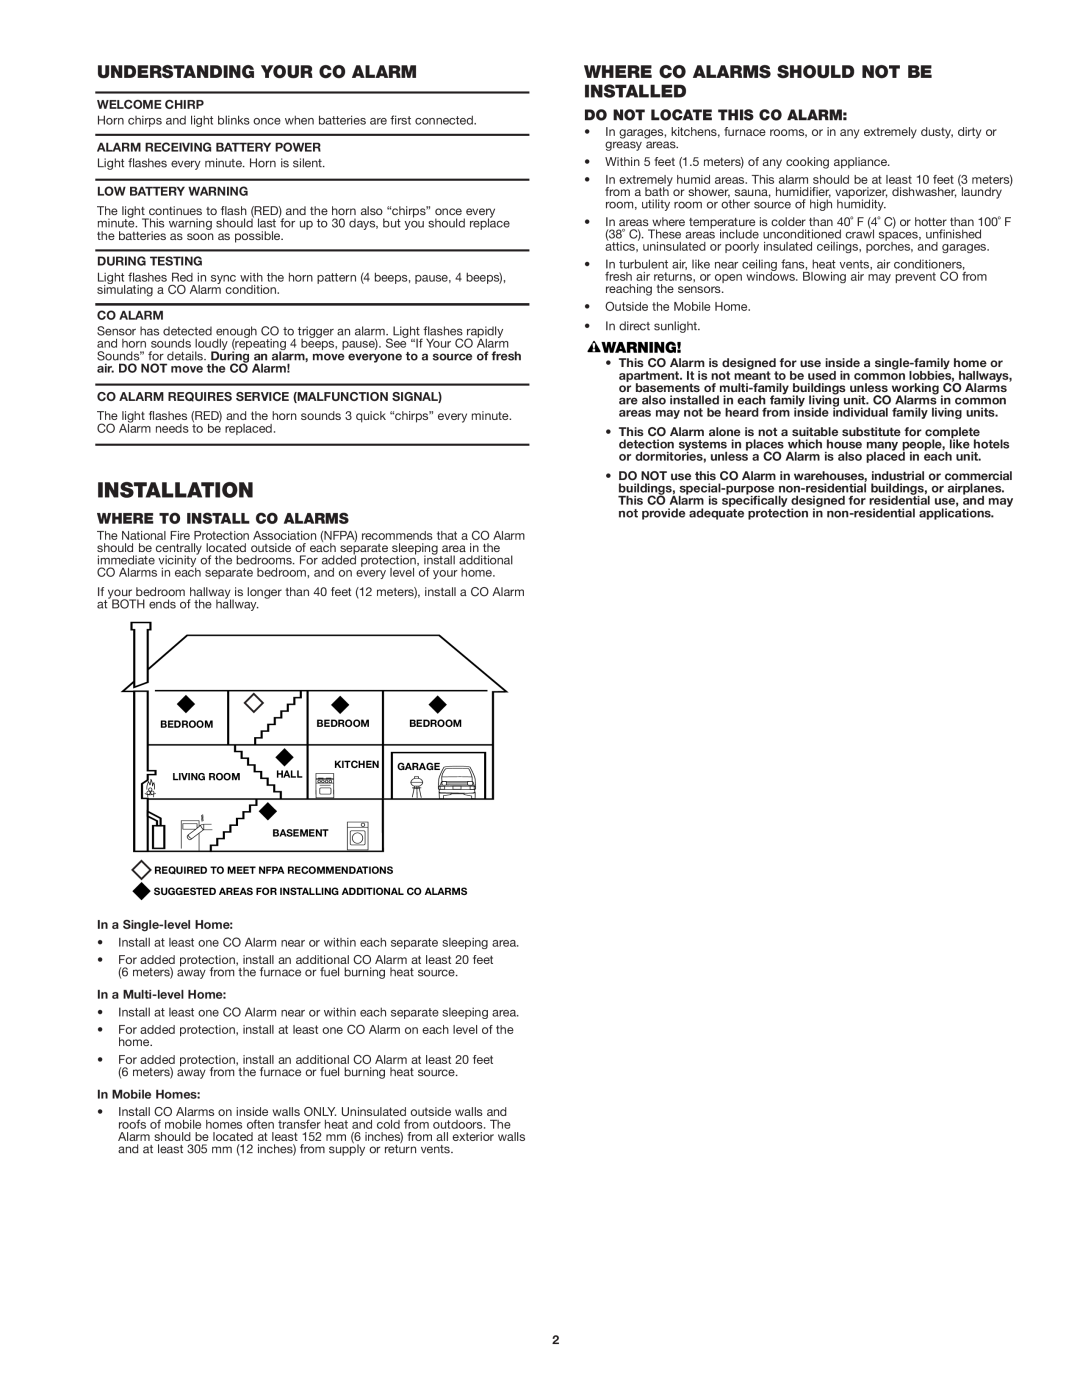 First Alert CO400 user manual Installation, Understanding Your Co Alarm, Where Co Alarms Should Not Be Installed 